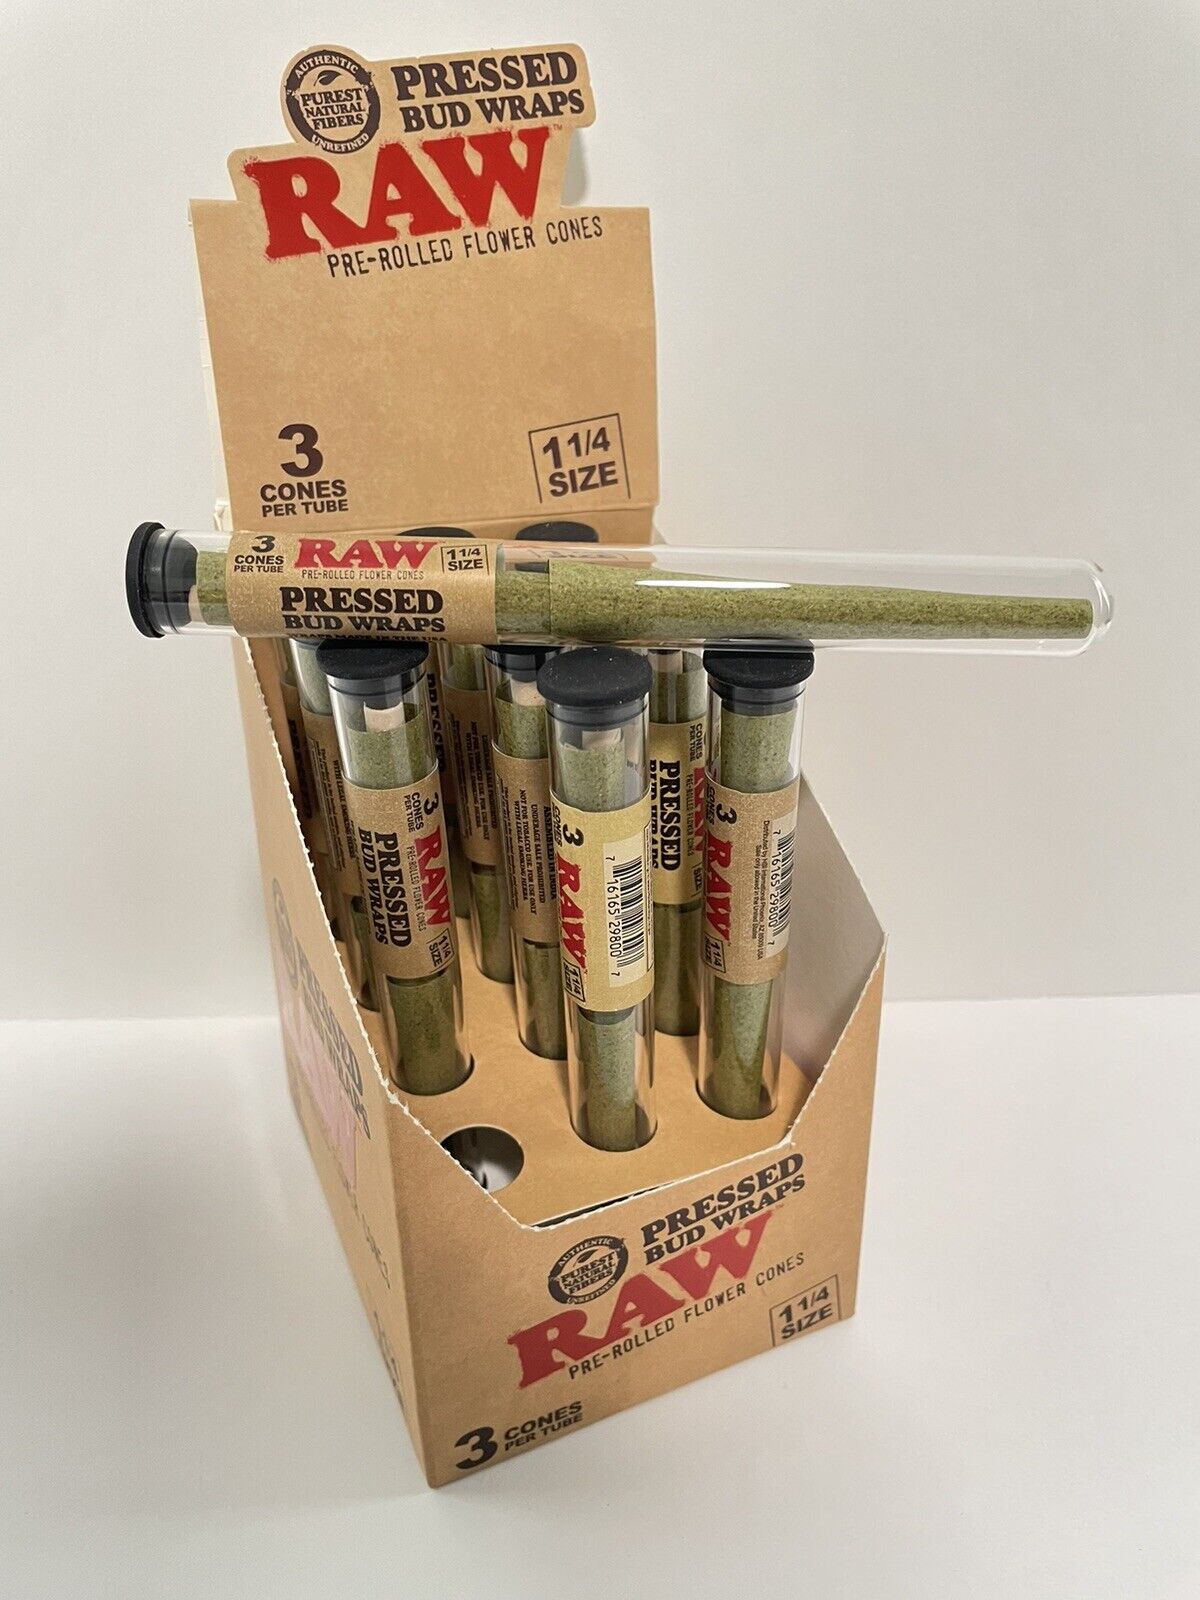 RAW Rolling Papers PRESSED BUD WRAP CONES One TUBE/3 Pre Rolled Cones 1 1/4 Size. Available Now for 8.99